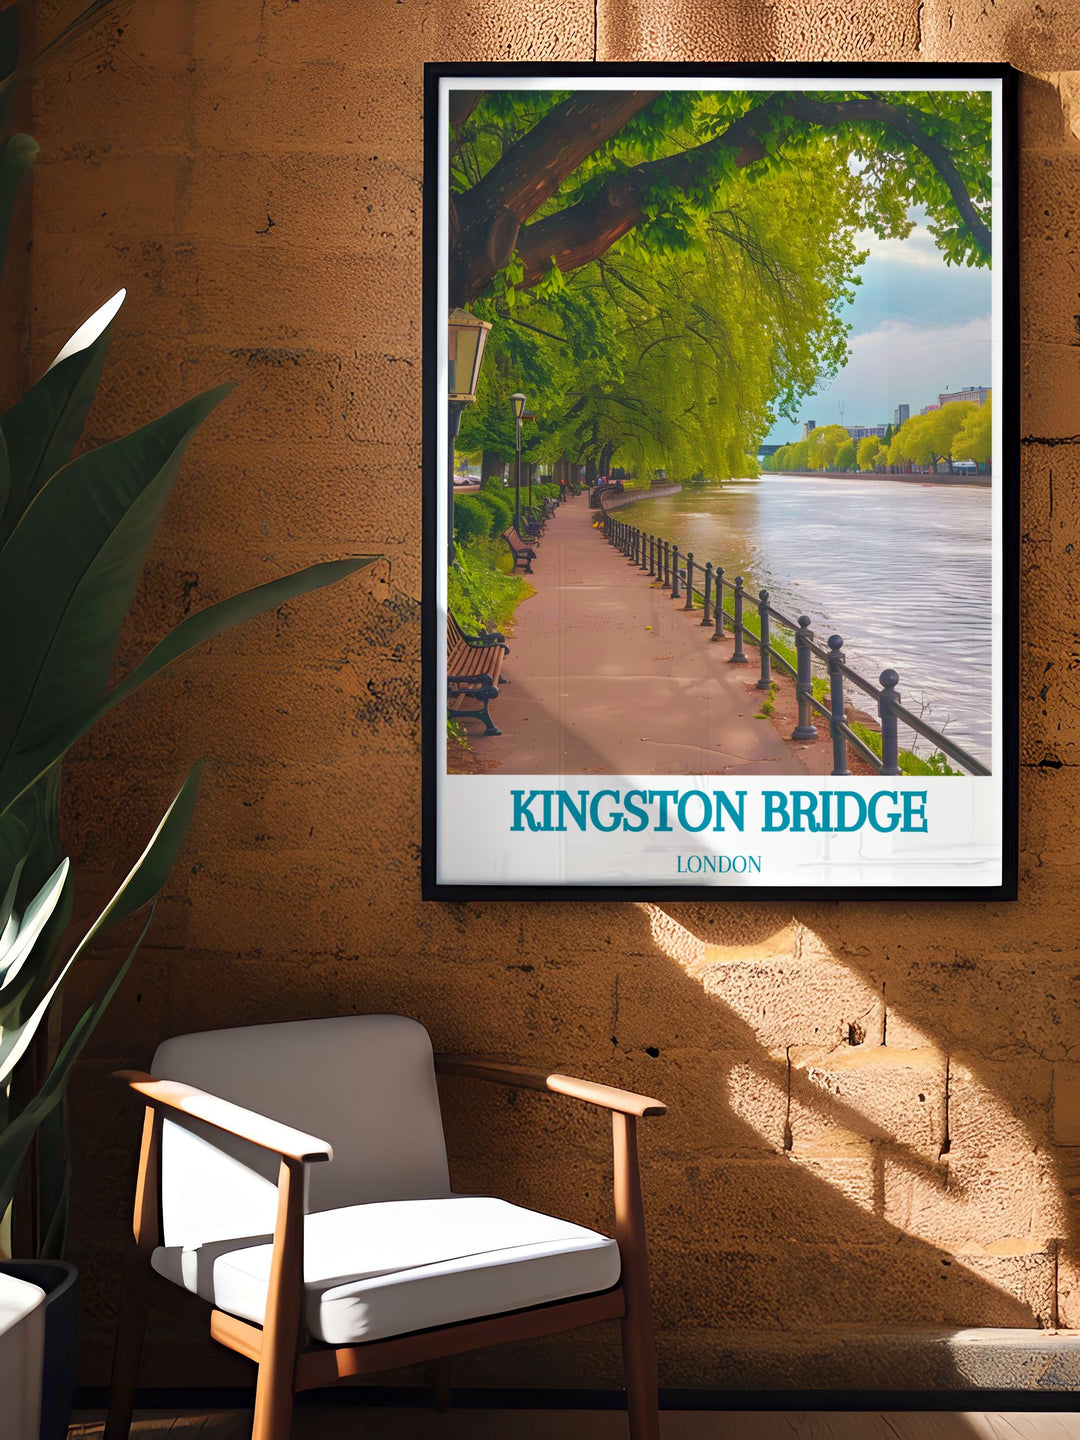 This travel poster of Kingston Bridge highlights the rich history and architectural beauty of one of Londons most significant structures, with a focus on its scenic surroundings.